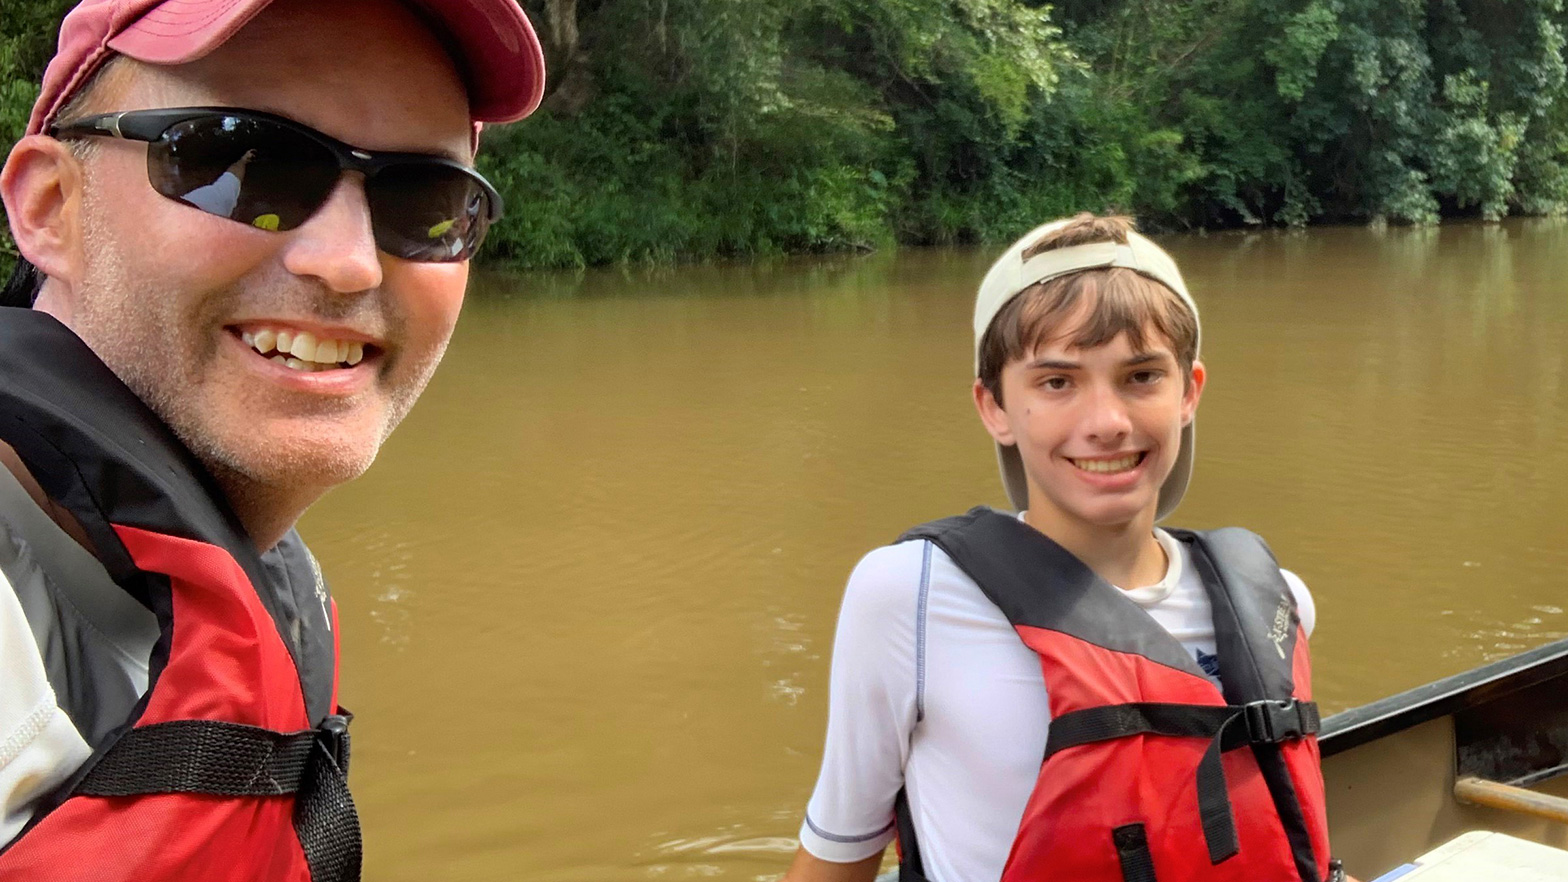 Sean Barnes, president of Chevron’s ENABLED employee network, enjoys a day on the river with his son, Mason.